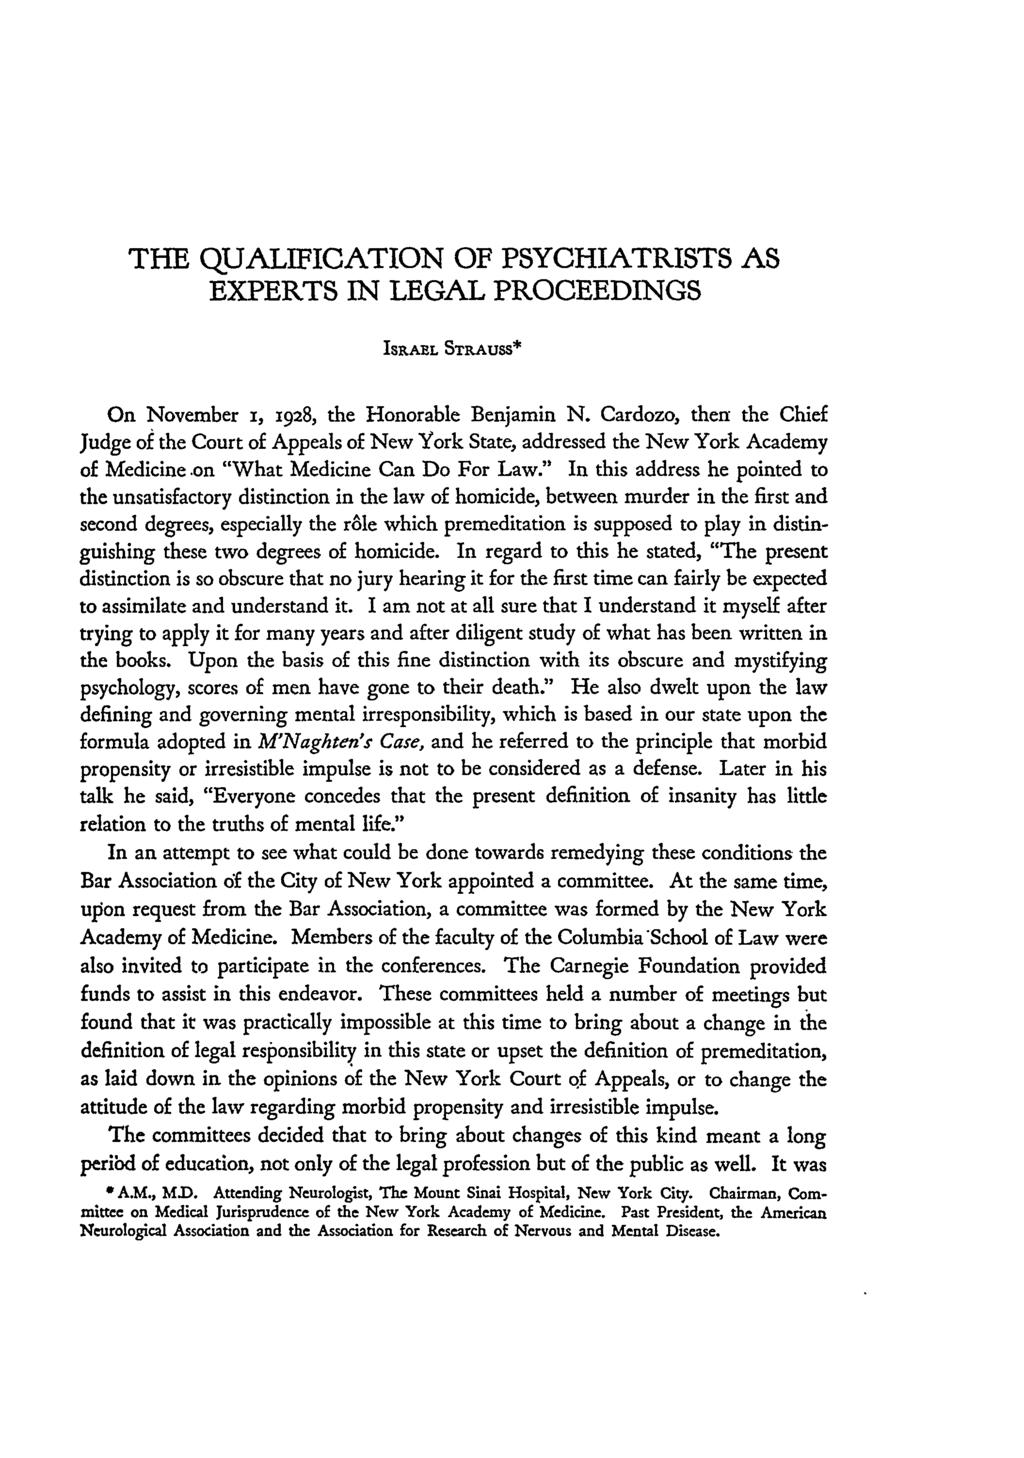 THE QUALIFICATION OF PSYCHIATRISTS AS EXPERTS IN LEGAL PROCEEDINGS ISRAEL STRAUSS* On November 1, 1928, the Honorable Benjamin N.